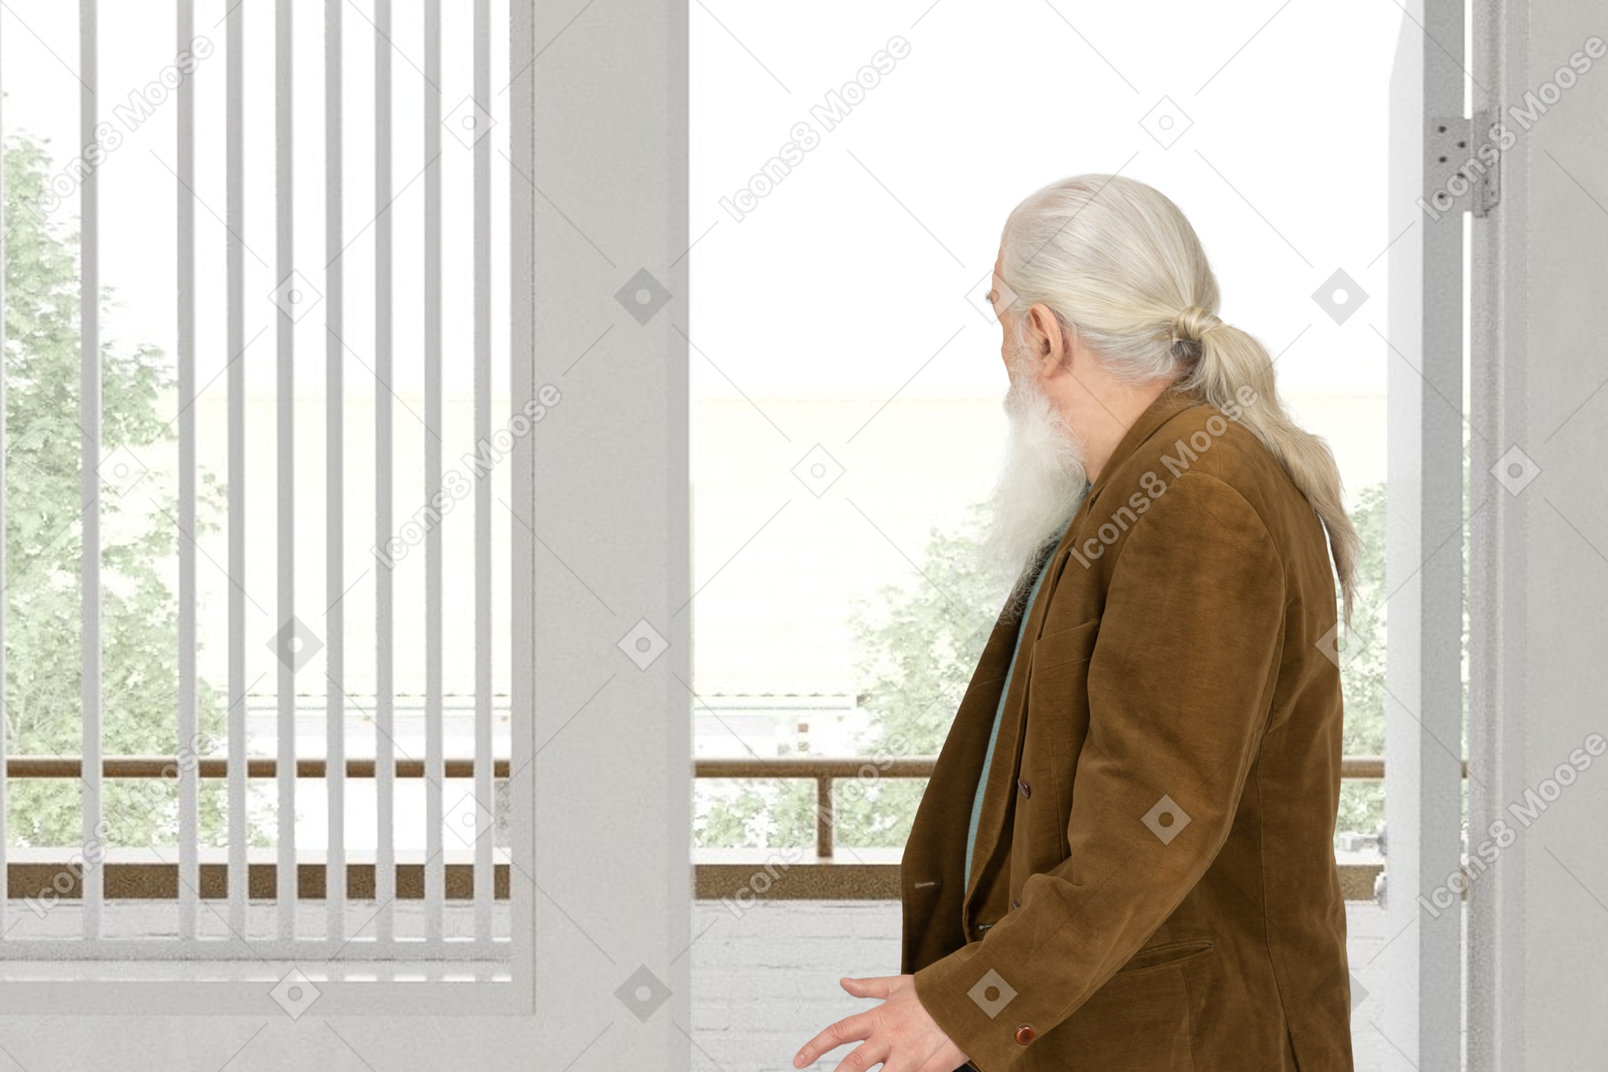 A man with a long white beard looking outside